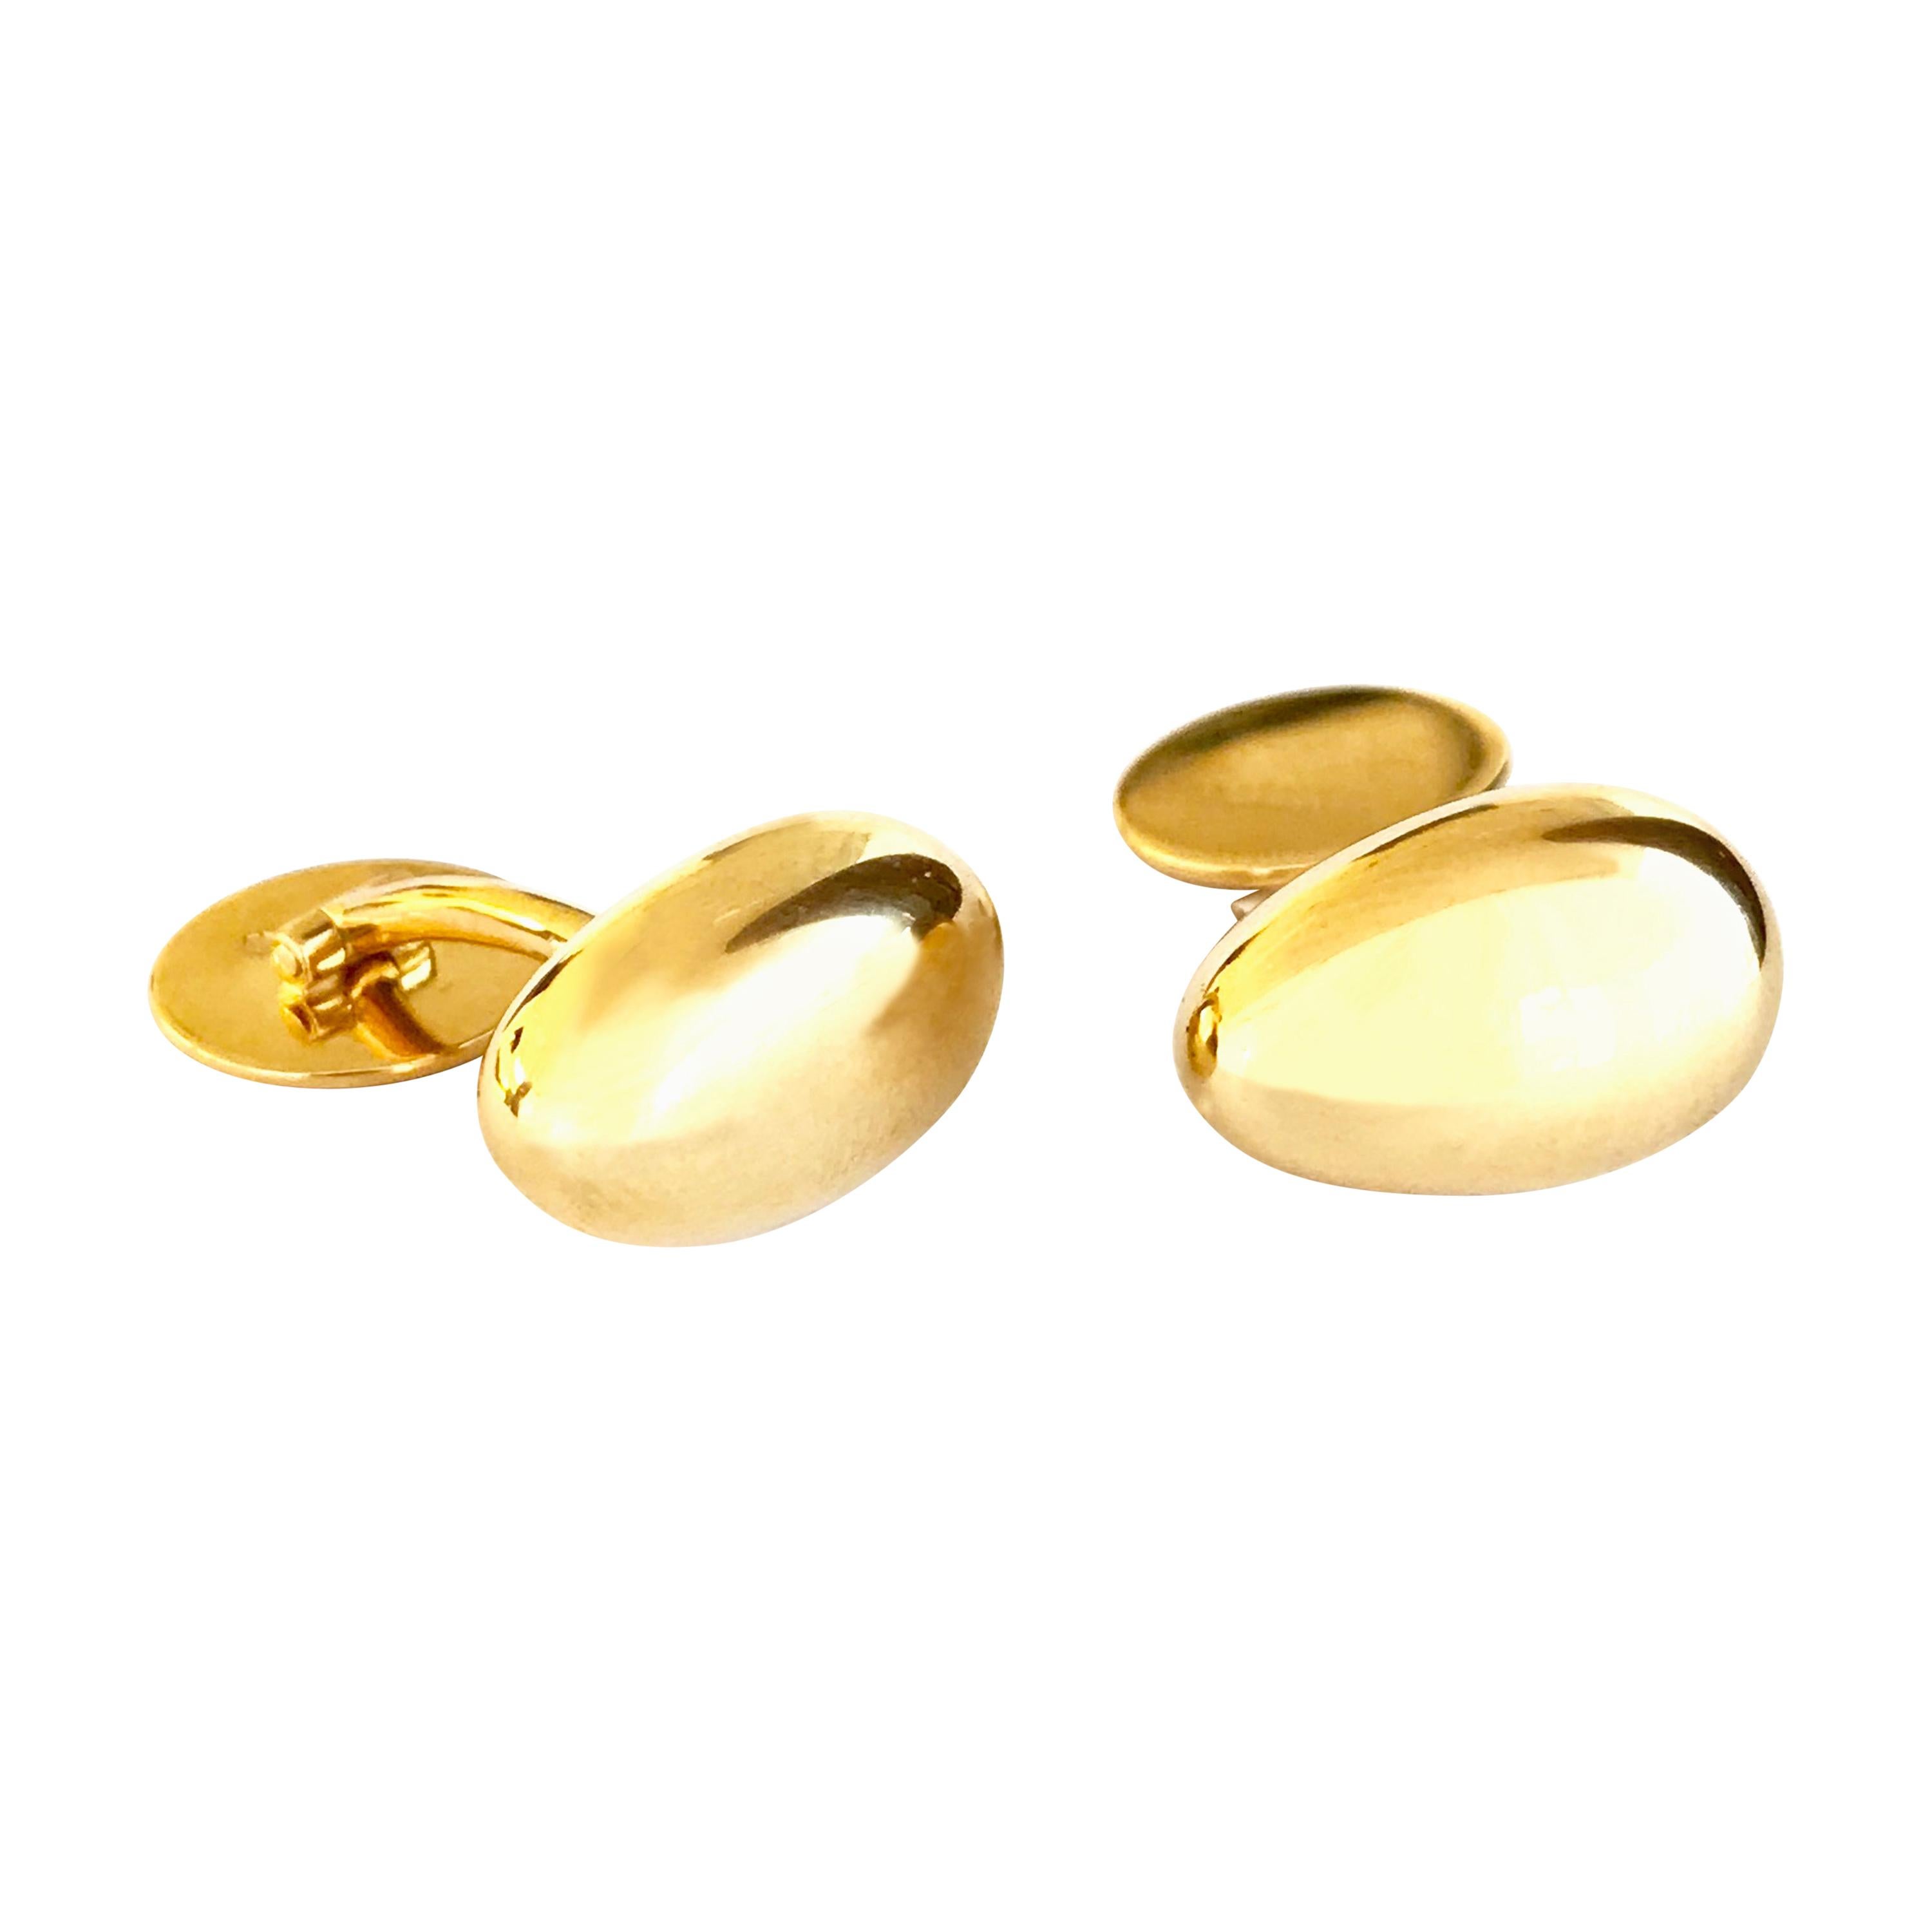 Rosior Contemporary "Nugget" Yellow Gold Cufflinks